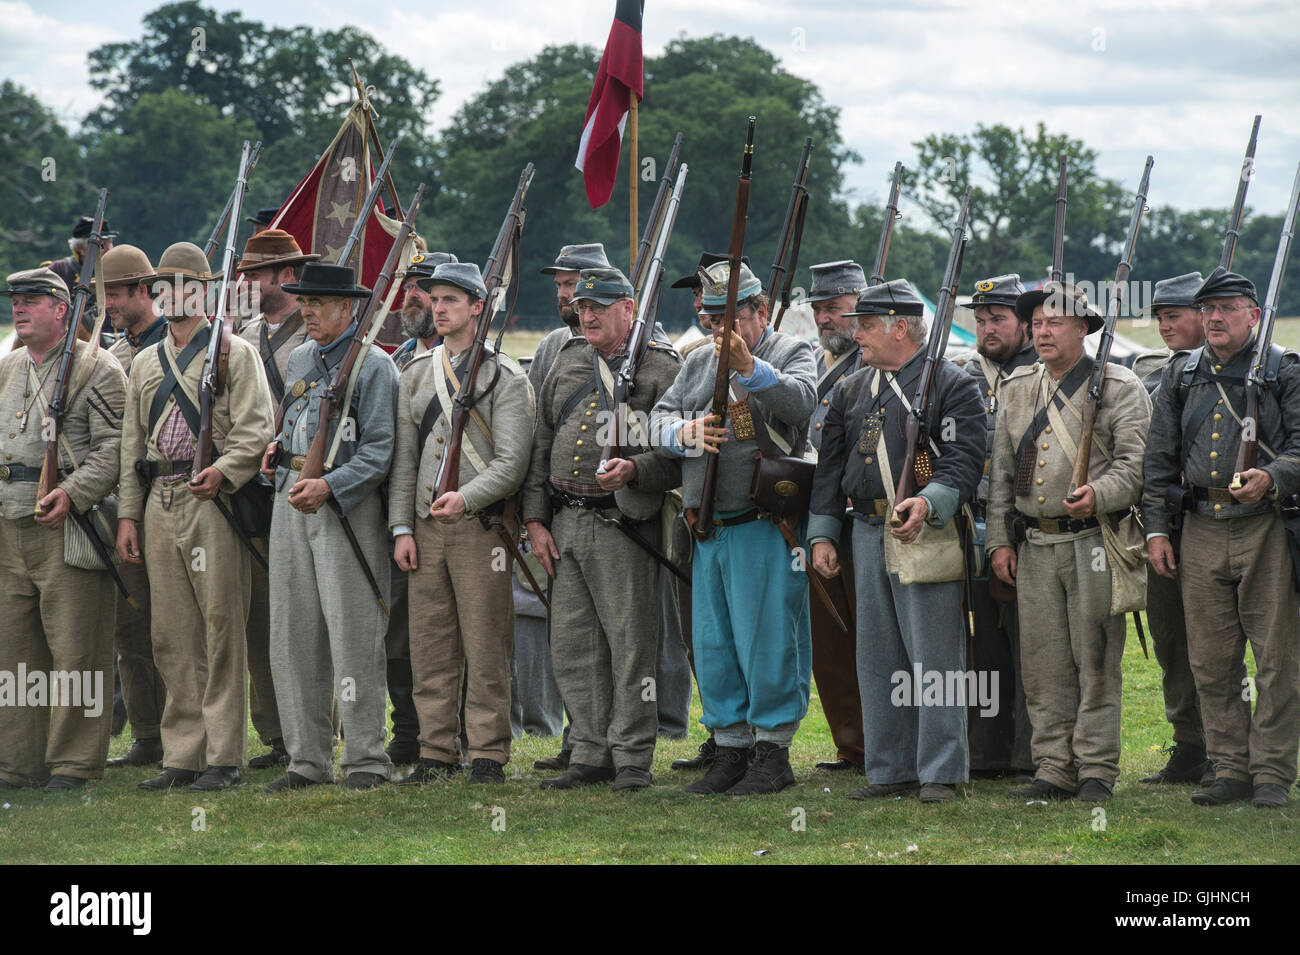 Confederate Soldiers on the battlefield of a American Civil war reenactment at Spetchley Park, Worcestershire, England Stock Photo